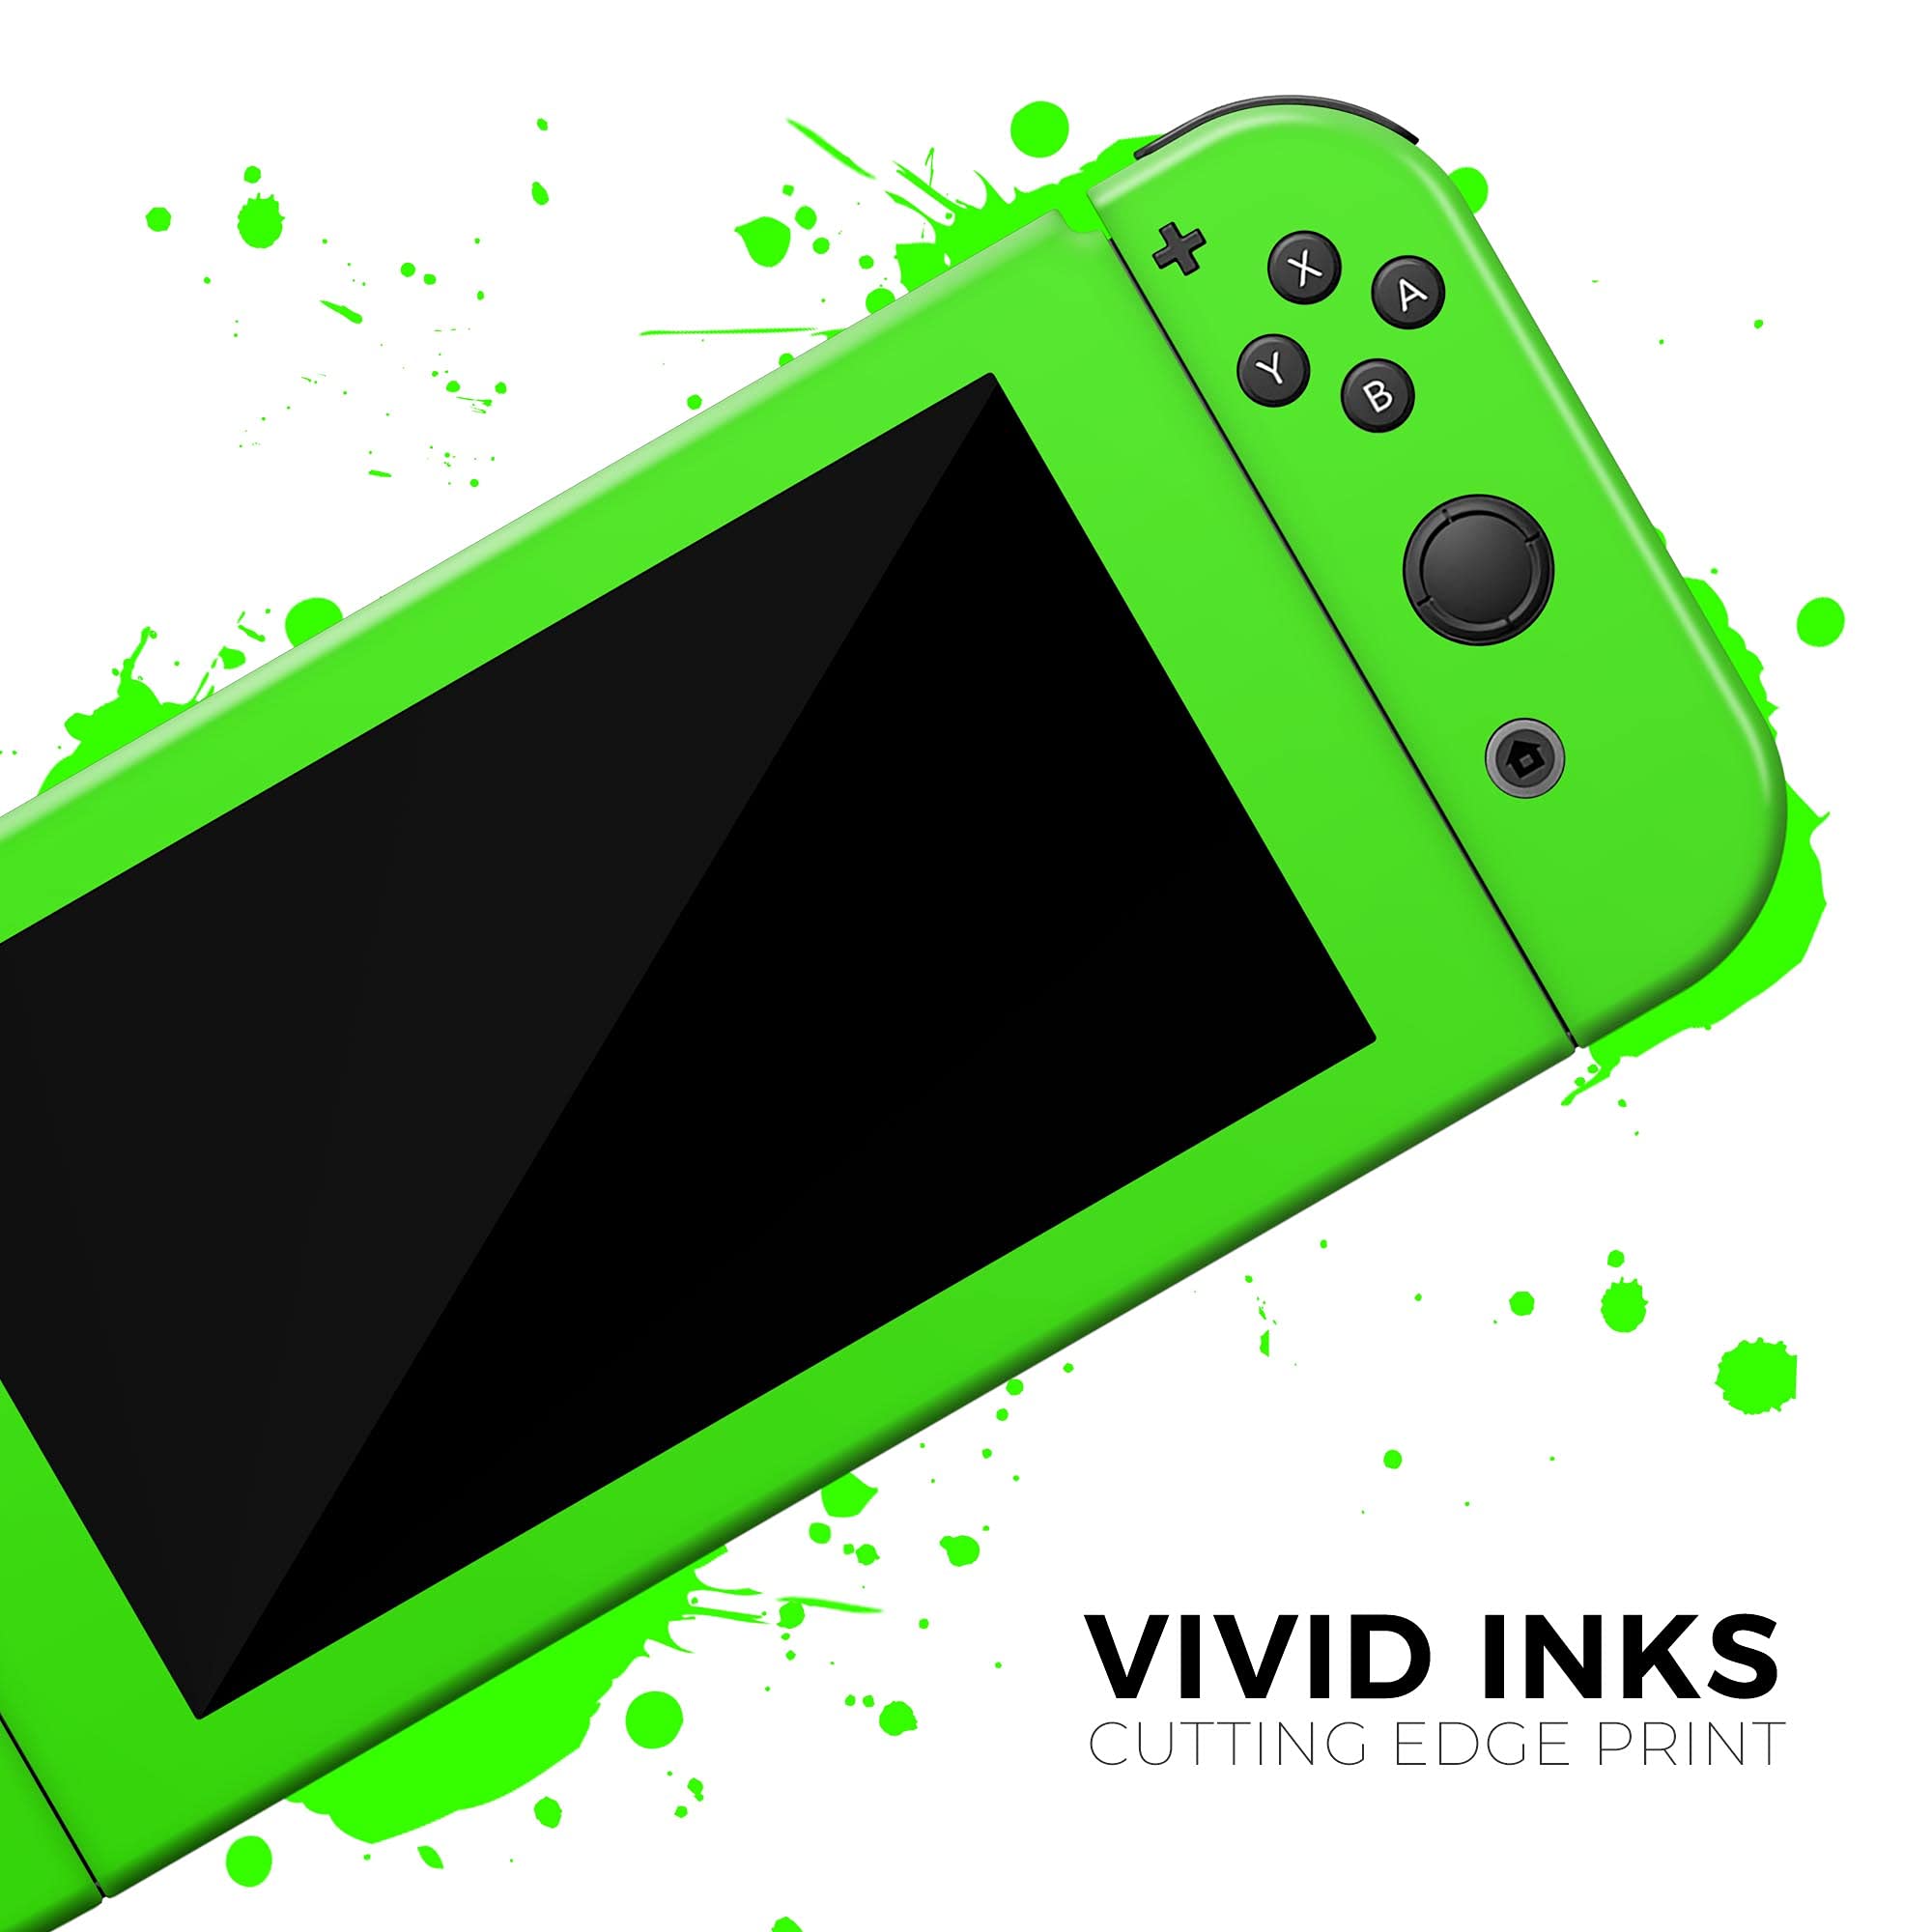 Design Skinz - Compatible with Nintendo Switch Console + Joy-Con - Skin Decal Protective Scratch-Resistant Removable Vinyl Wrap Cover - Solid Lime Green V2